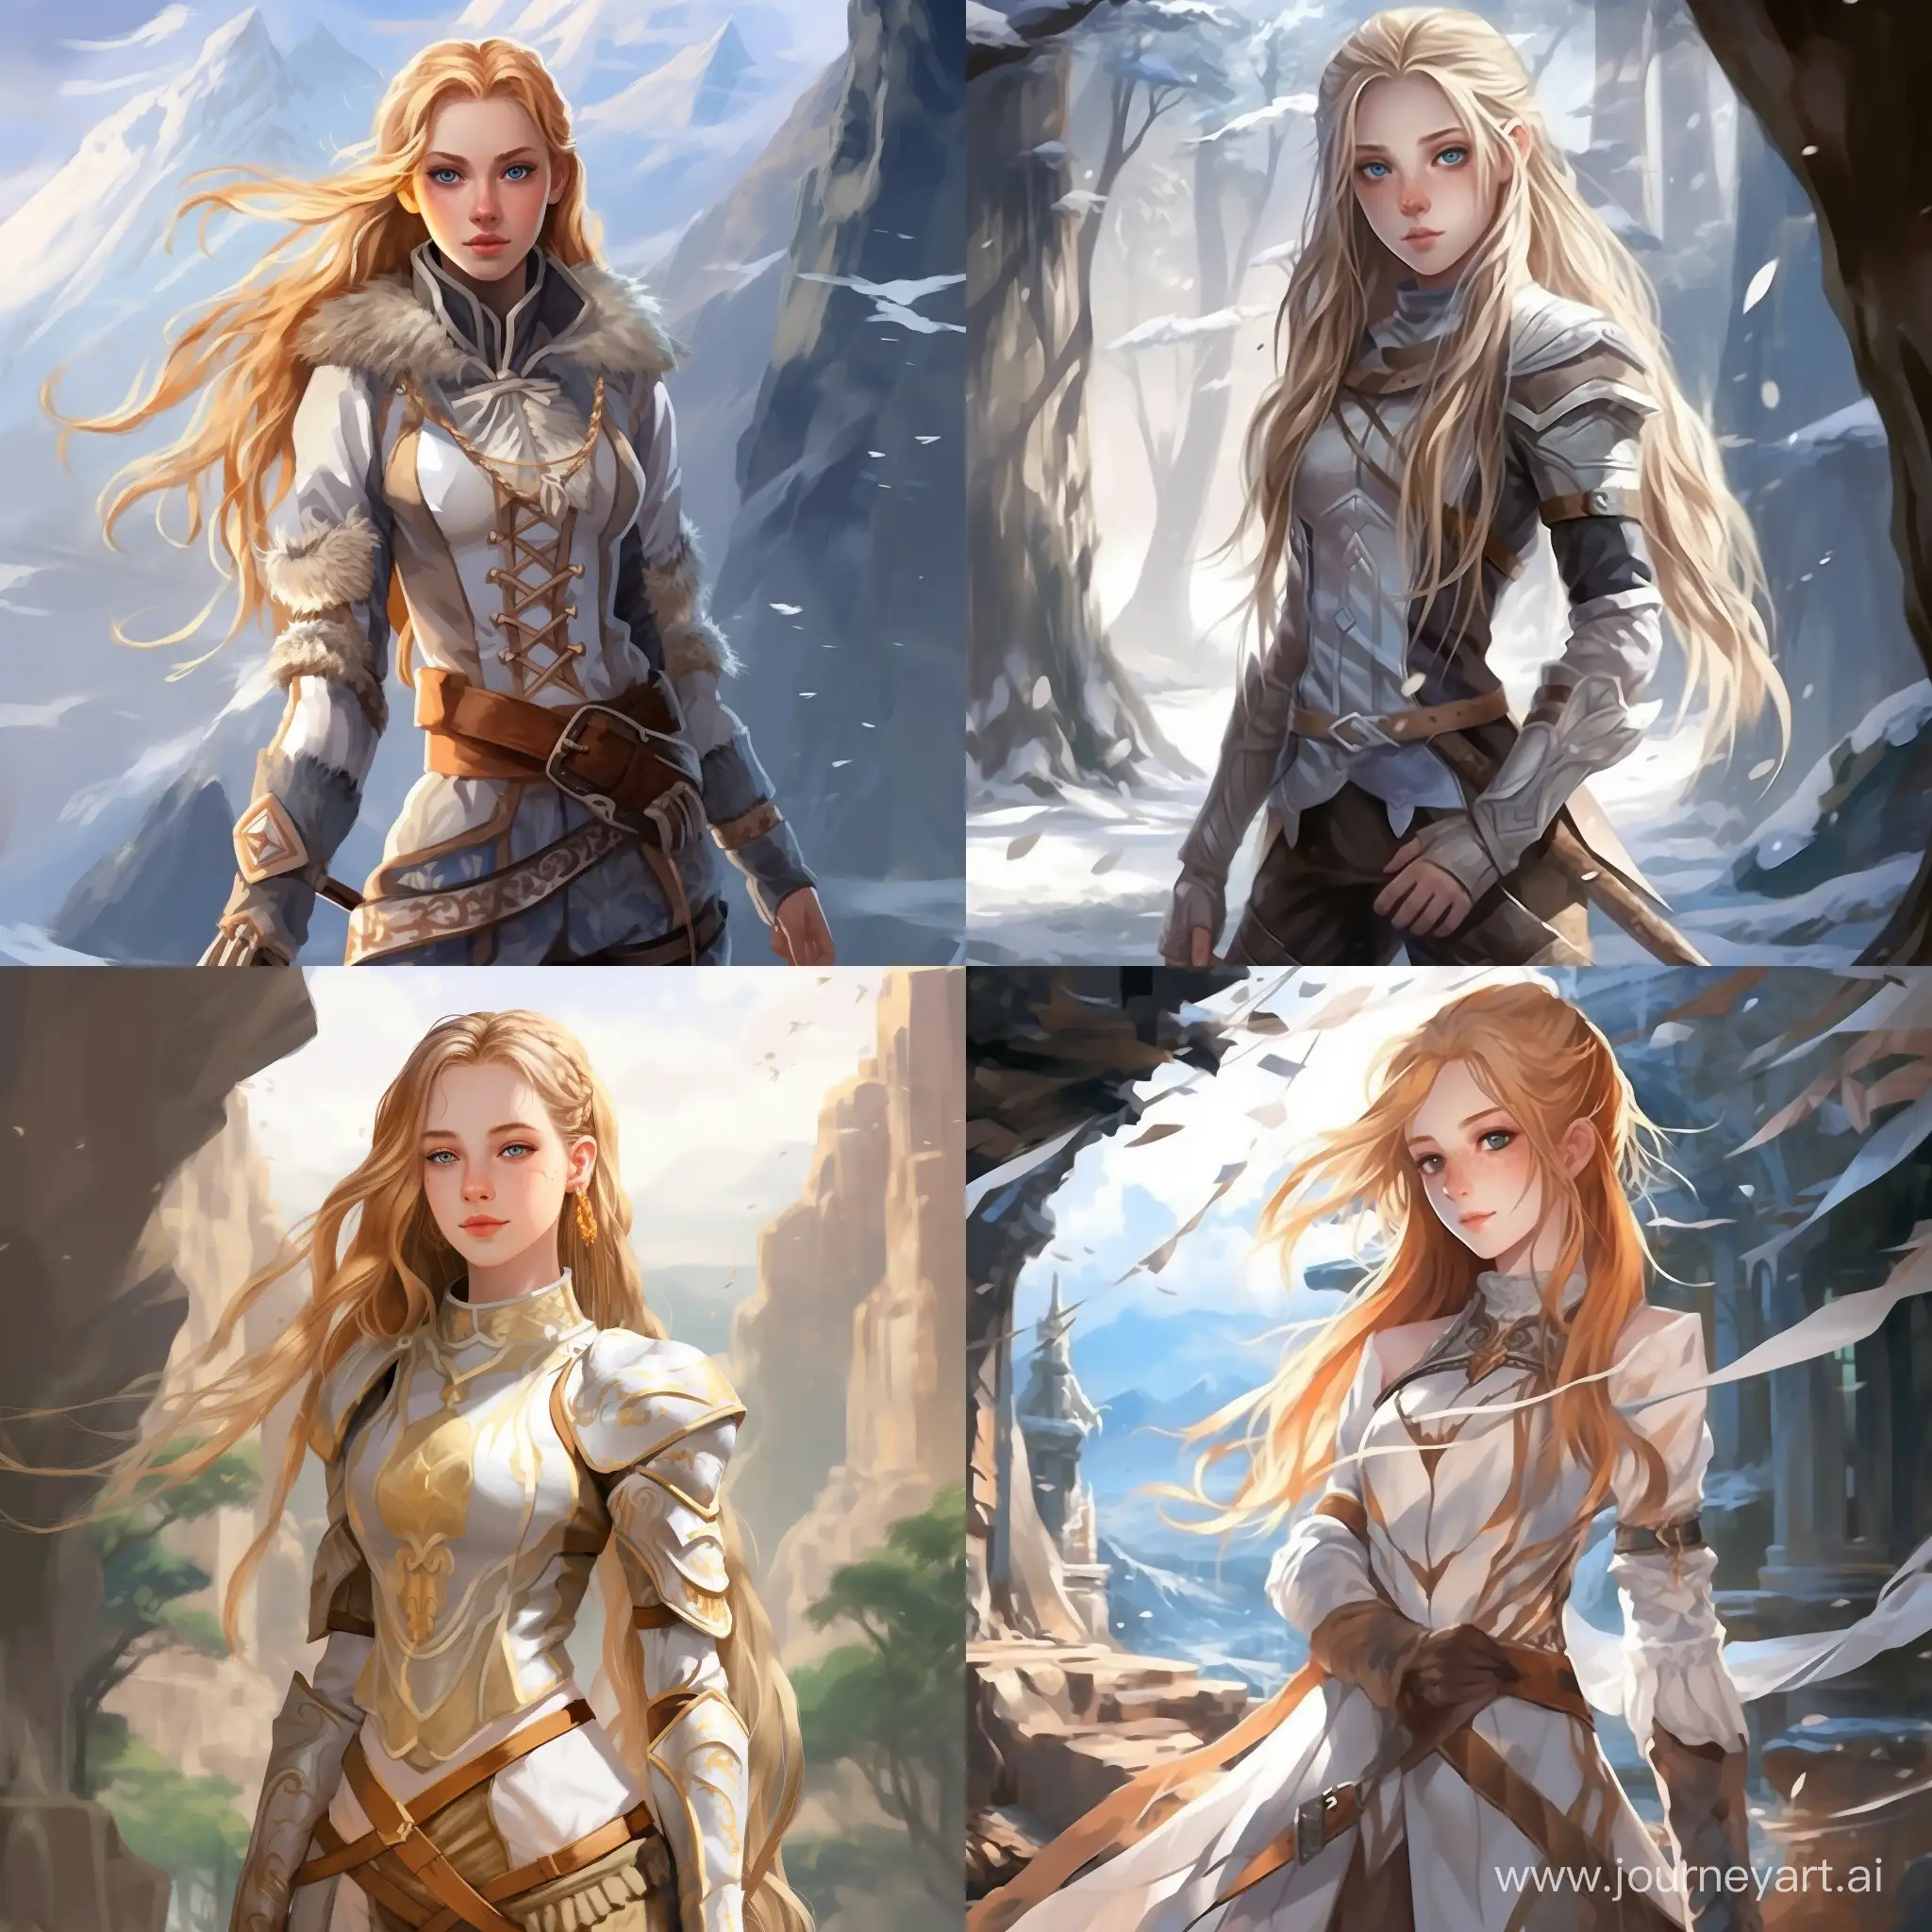 Beautiful girl, golden hair, gray-blue eyes, snow-white skin, teenager, 14 years old, in the style of avatar legend of aang, full-length, magic, high quality, high detail, cartoon art